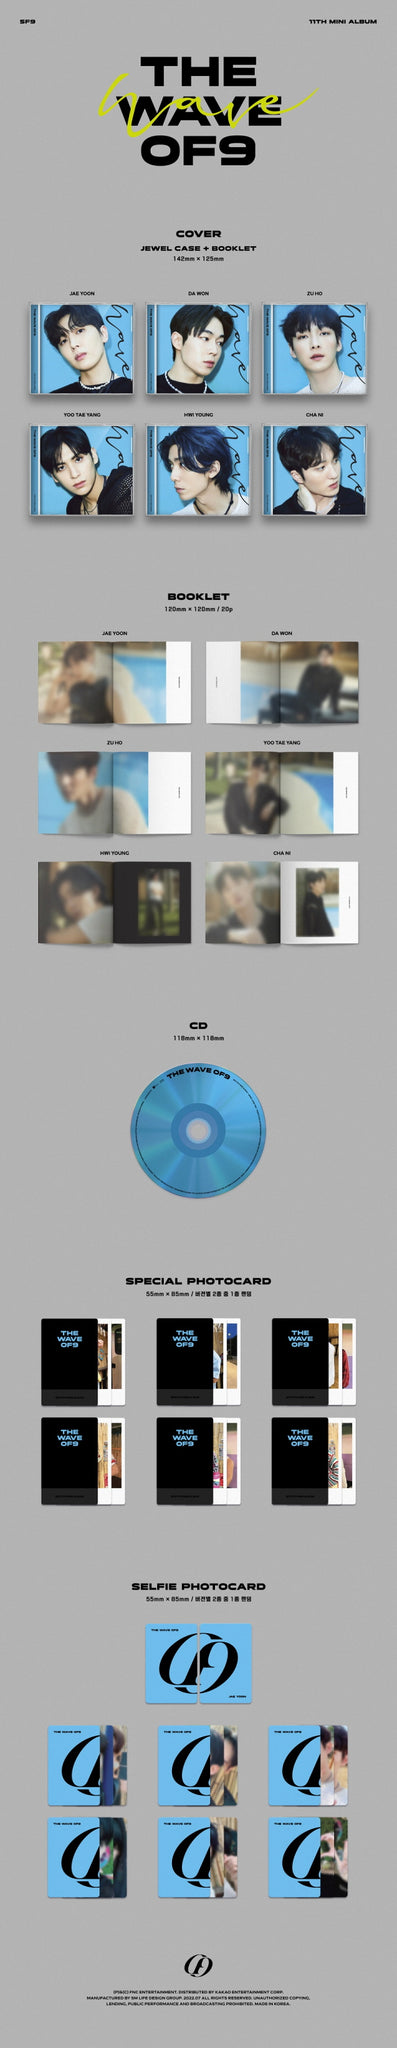 SF9 - THE WAVE OF9 (Jewel Case)(Limited Edition)